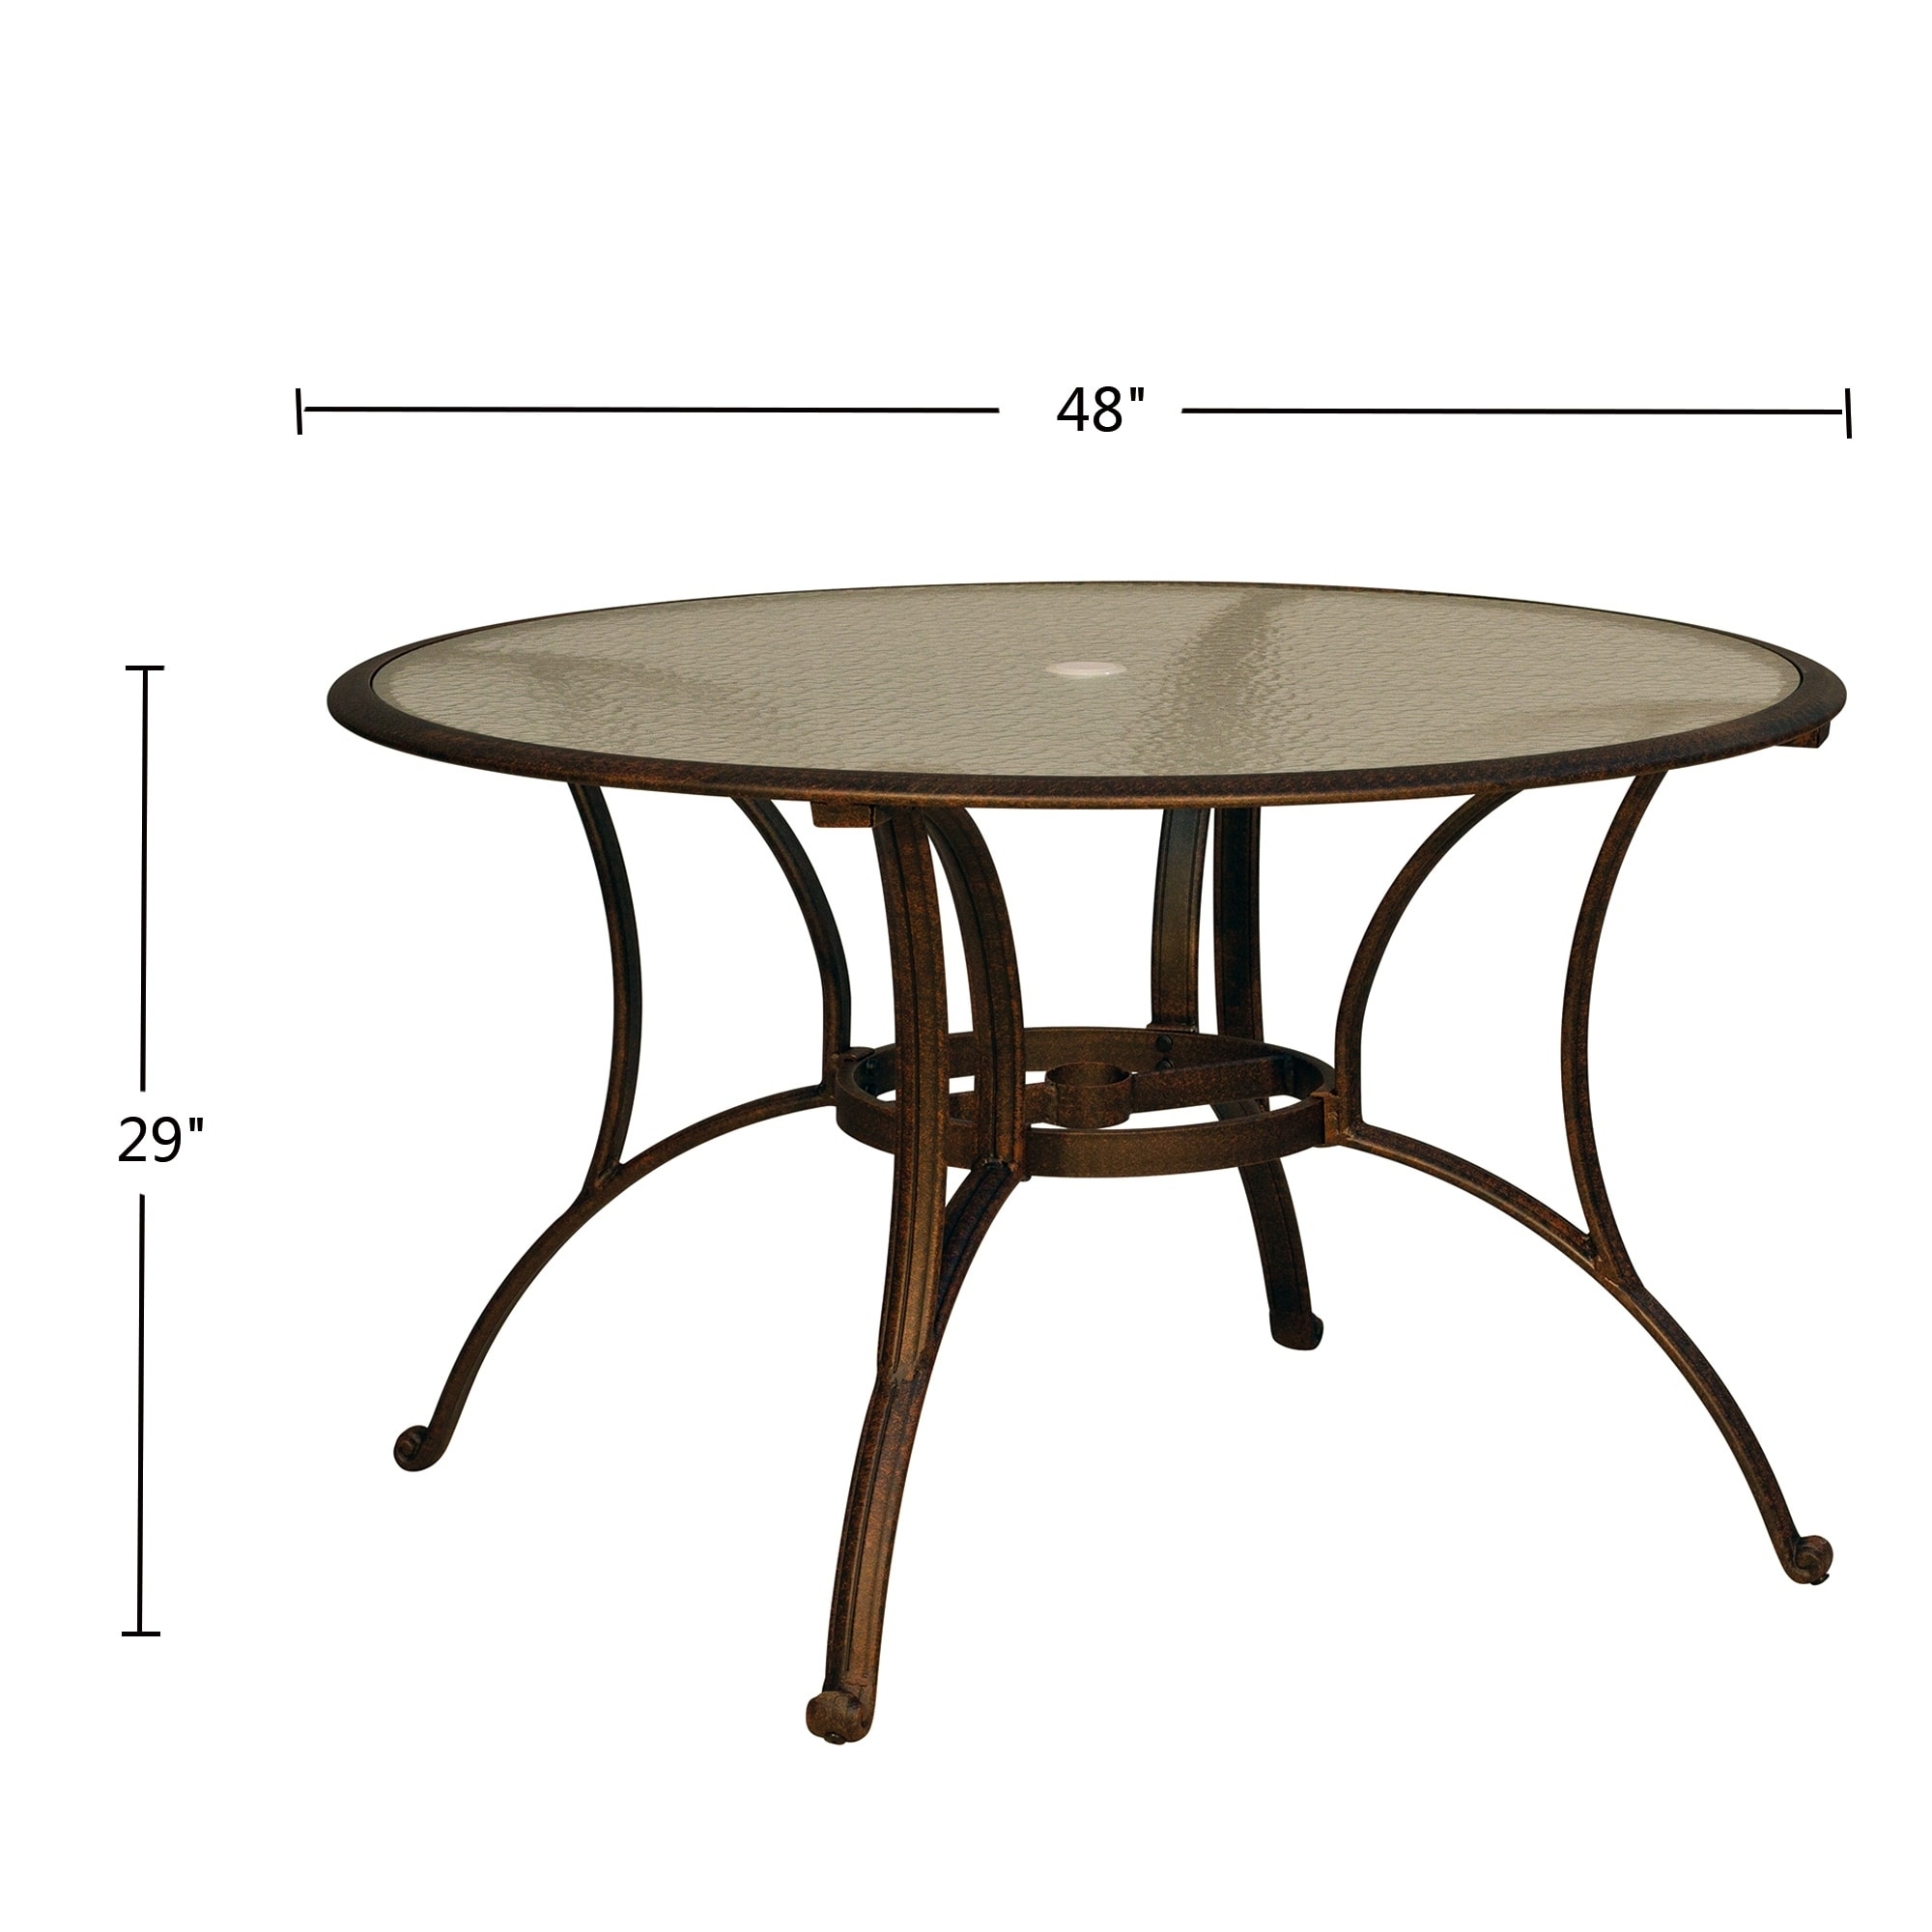 48 round glass table top with umbrella hole